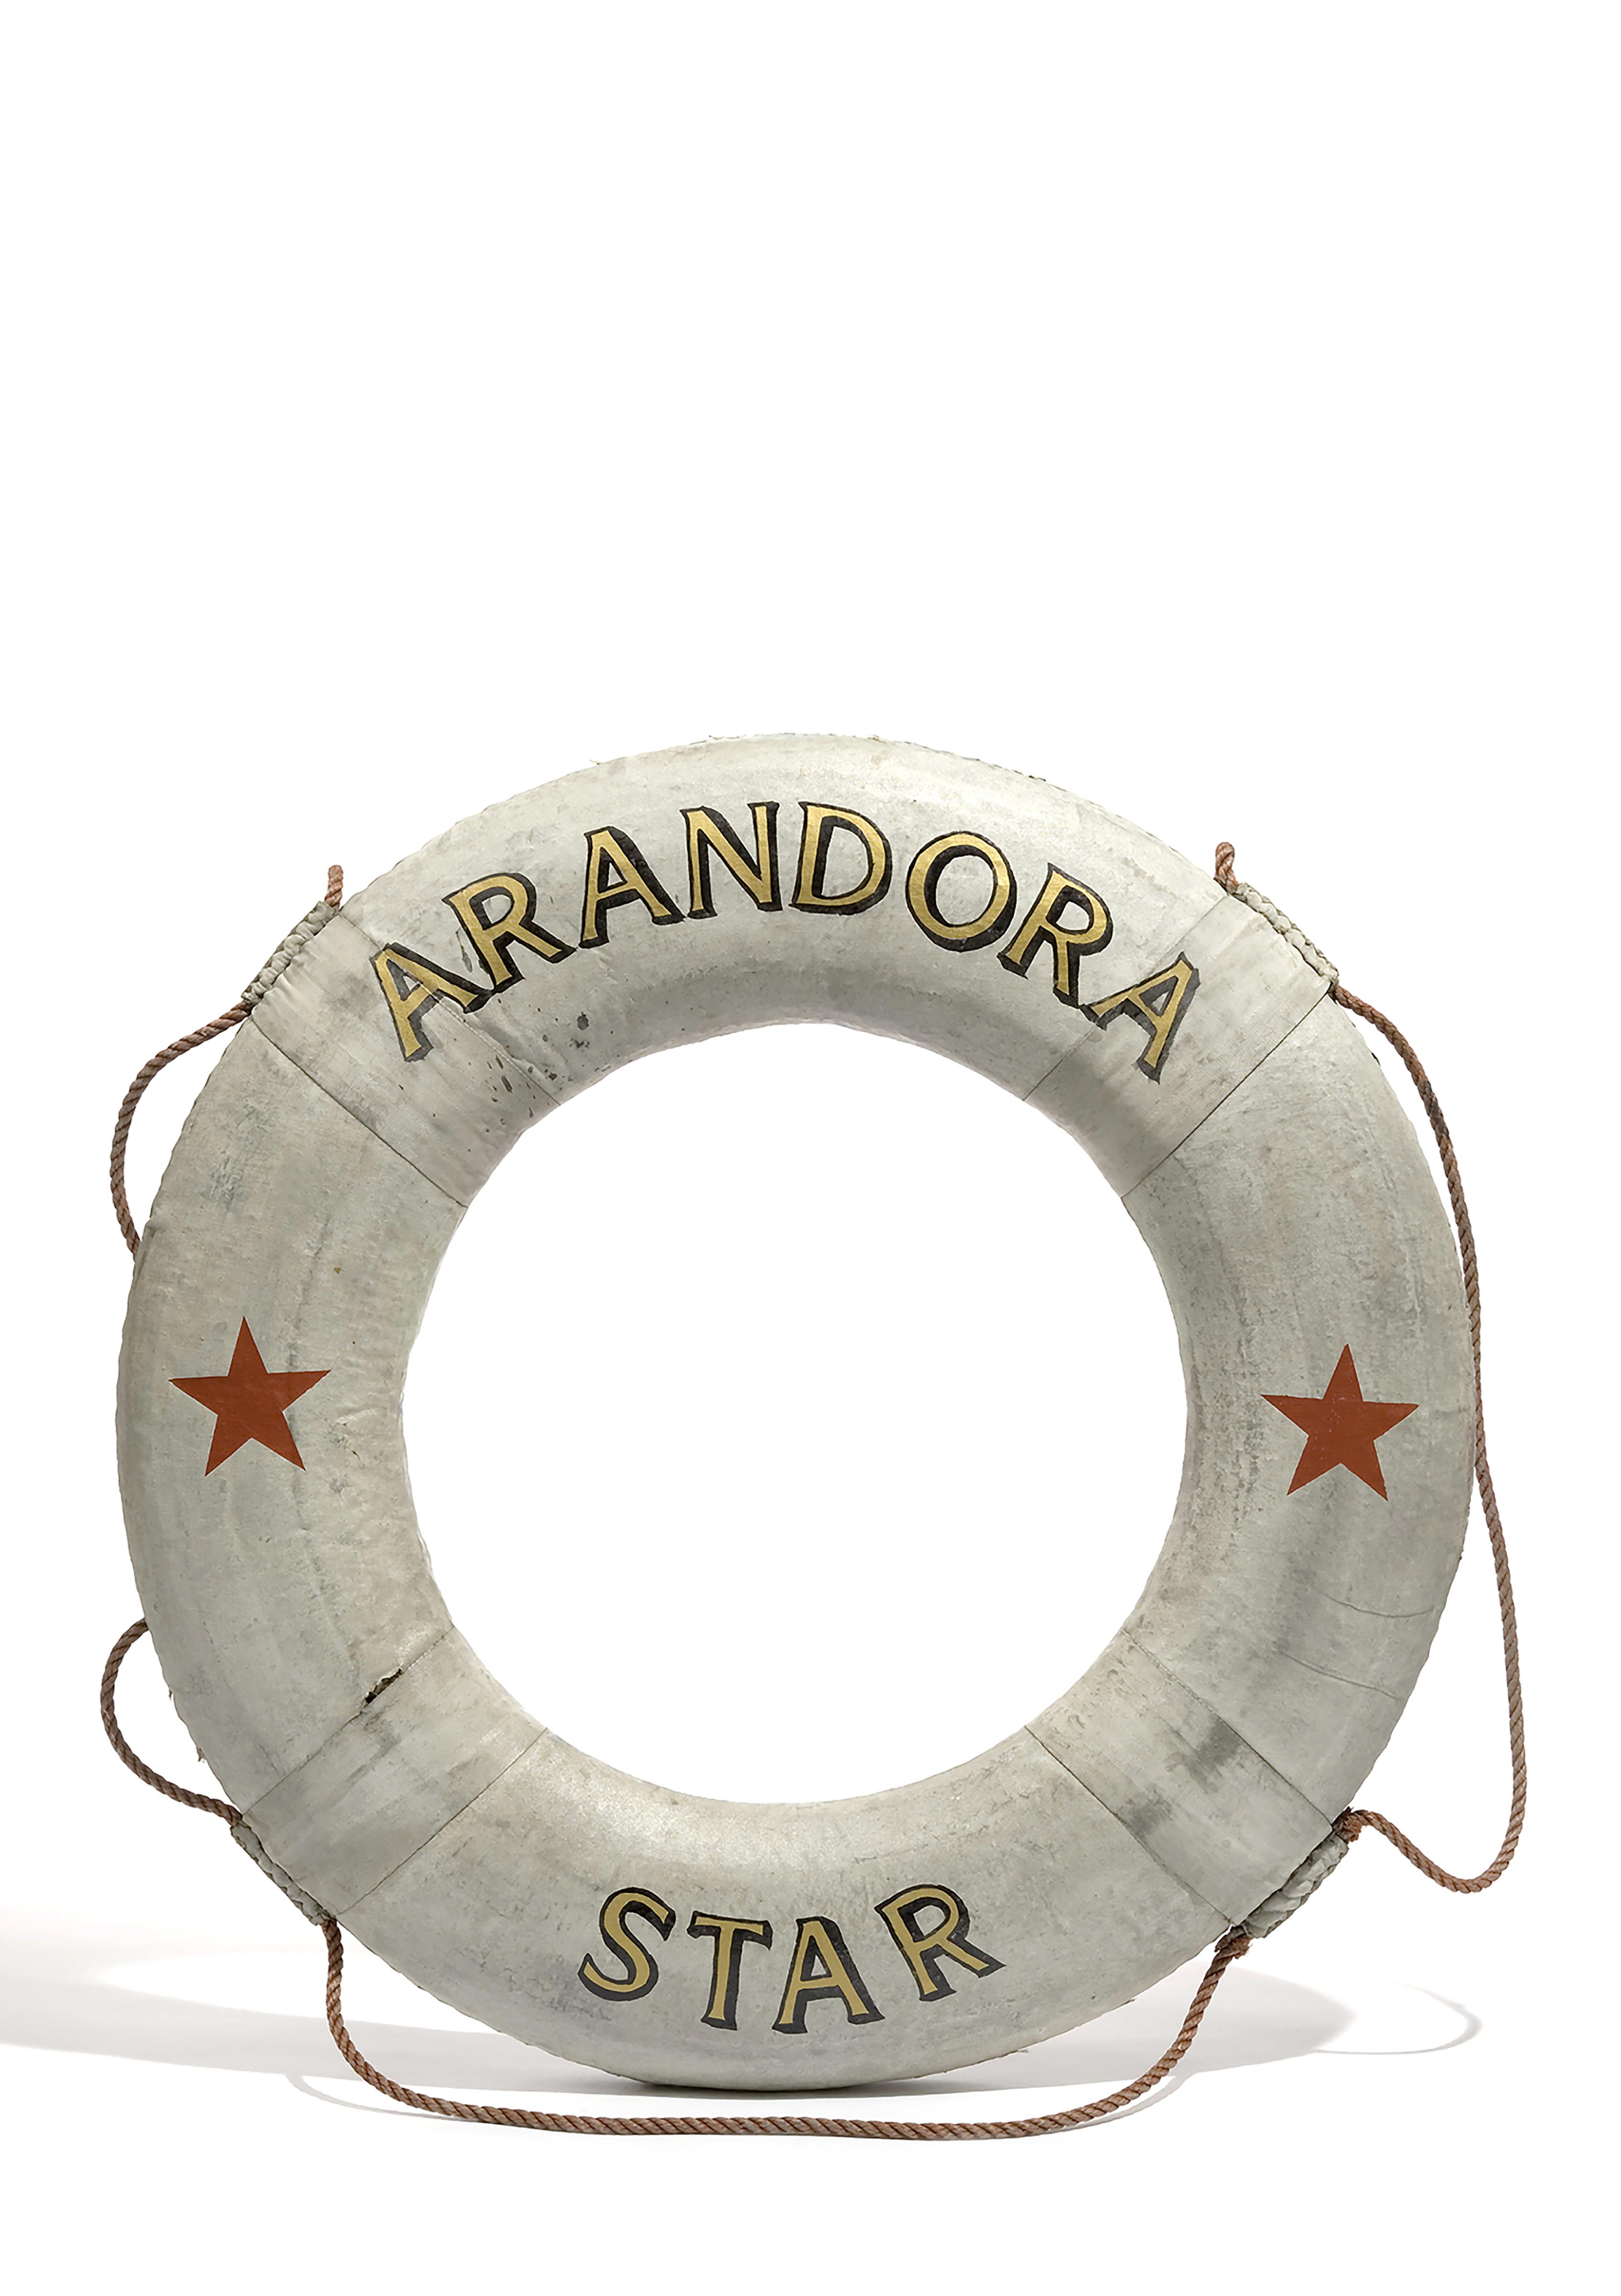 Life boat ring with the words Arandora Star on